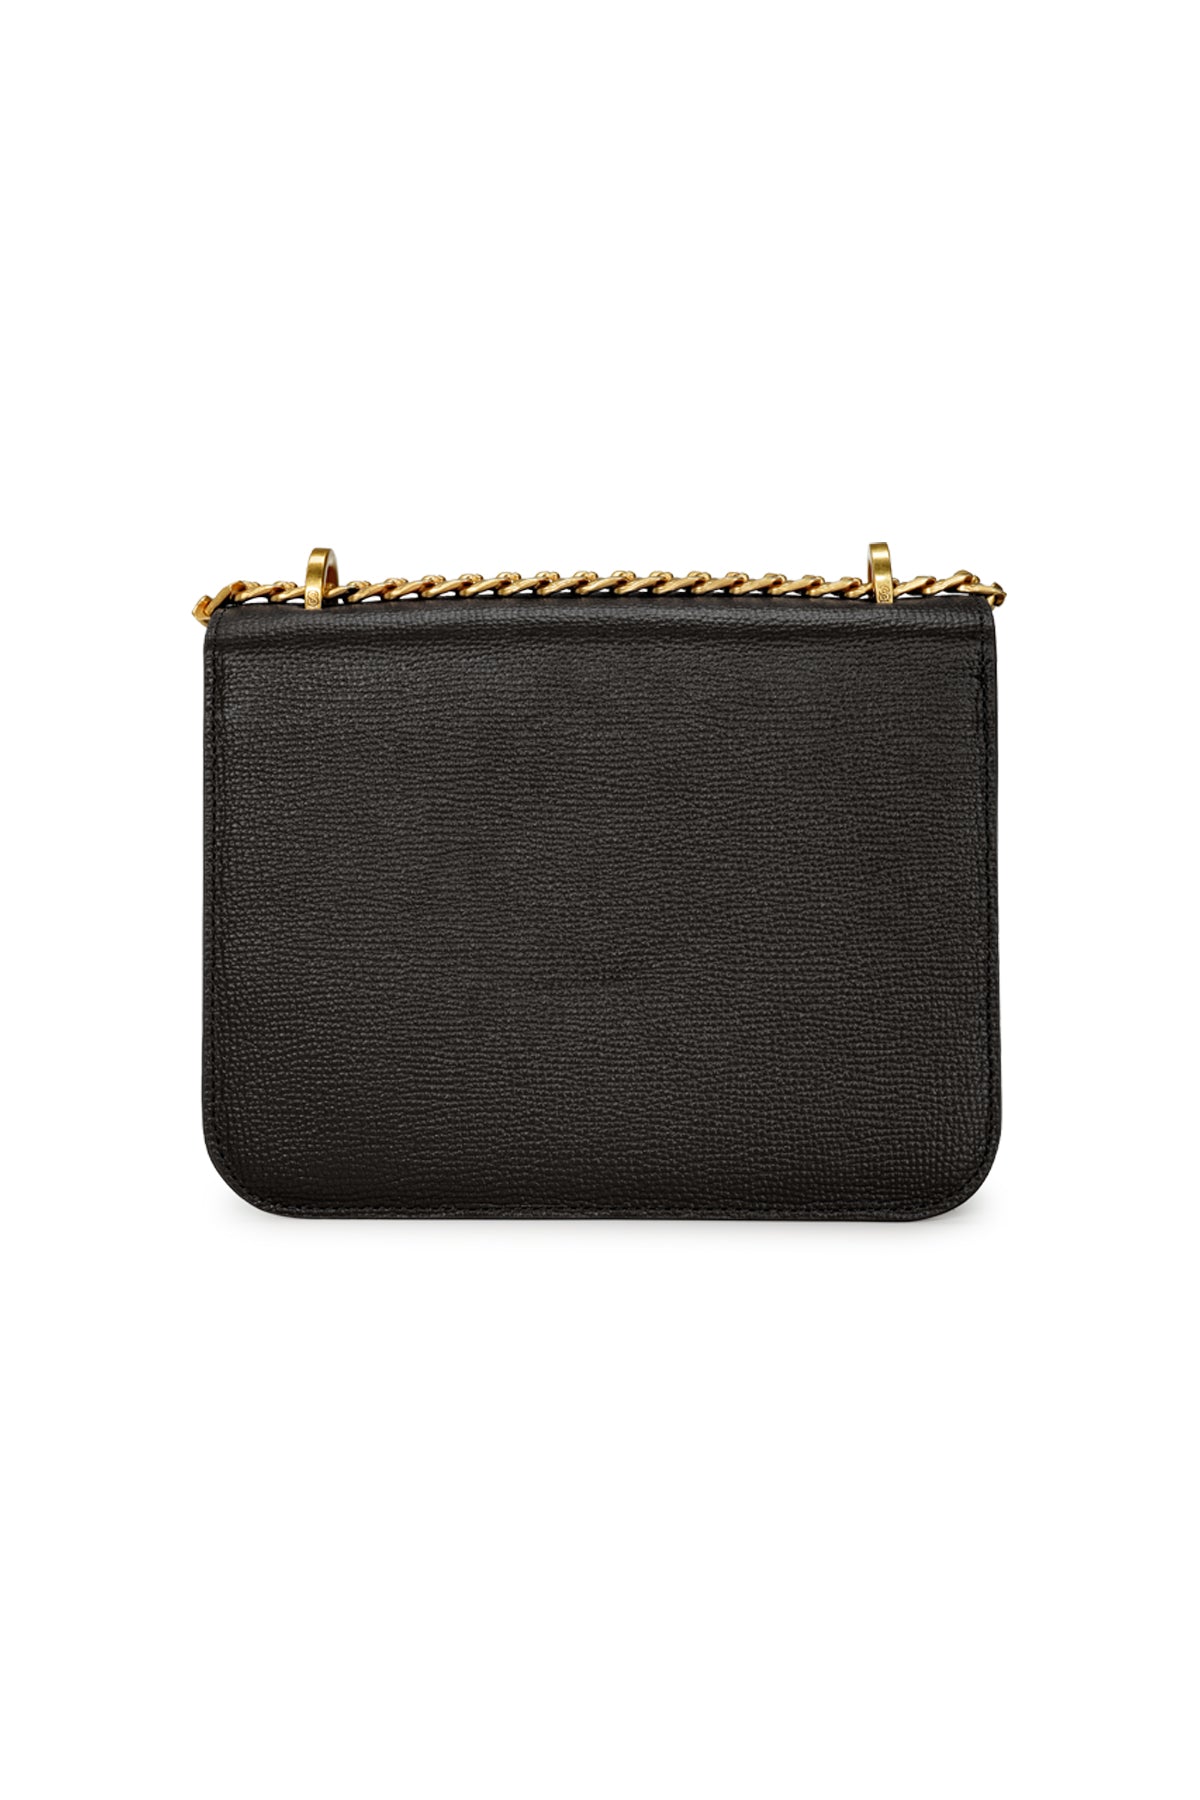 Audrey Chain Leather Bag Small - Caviar